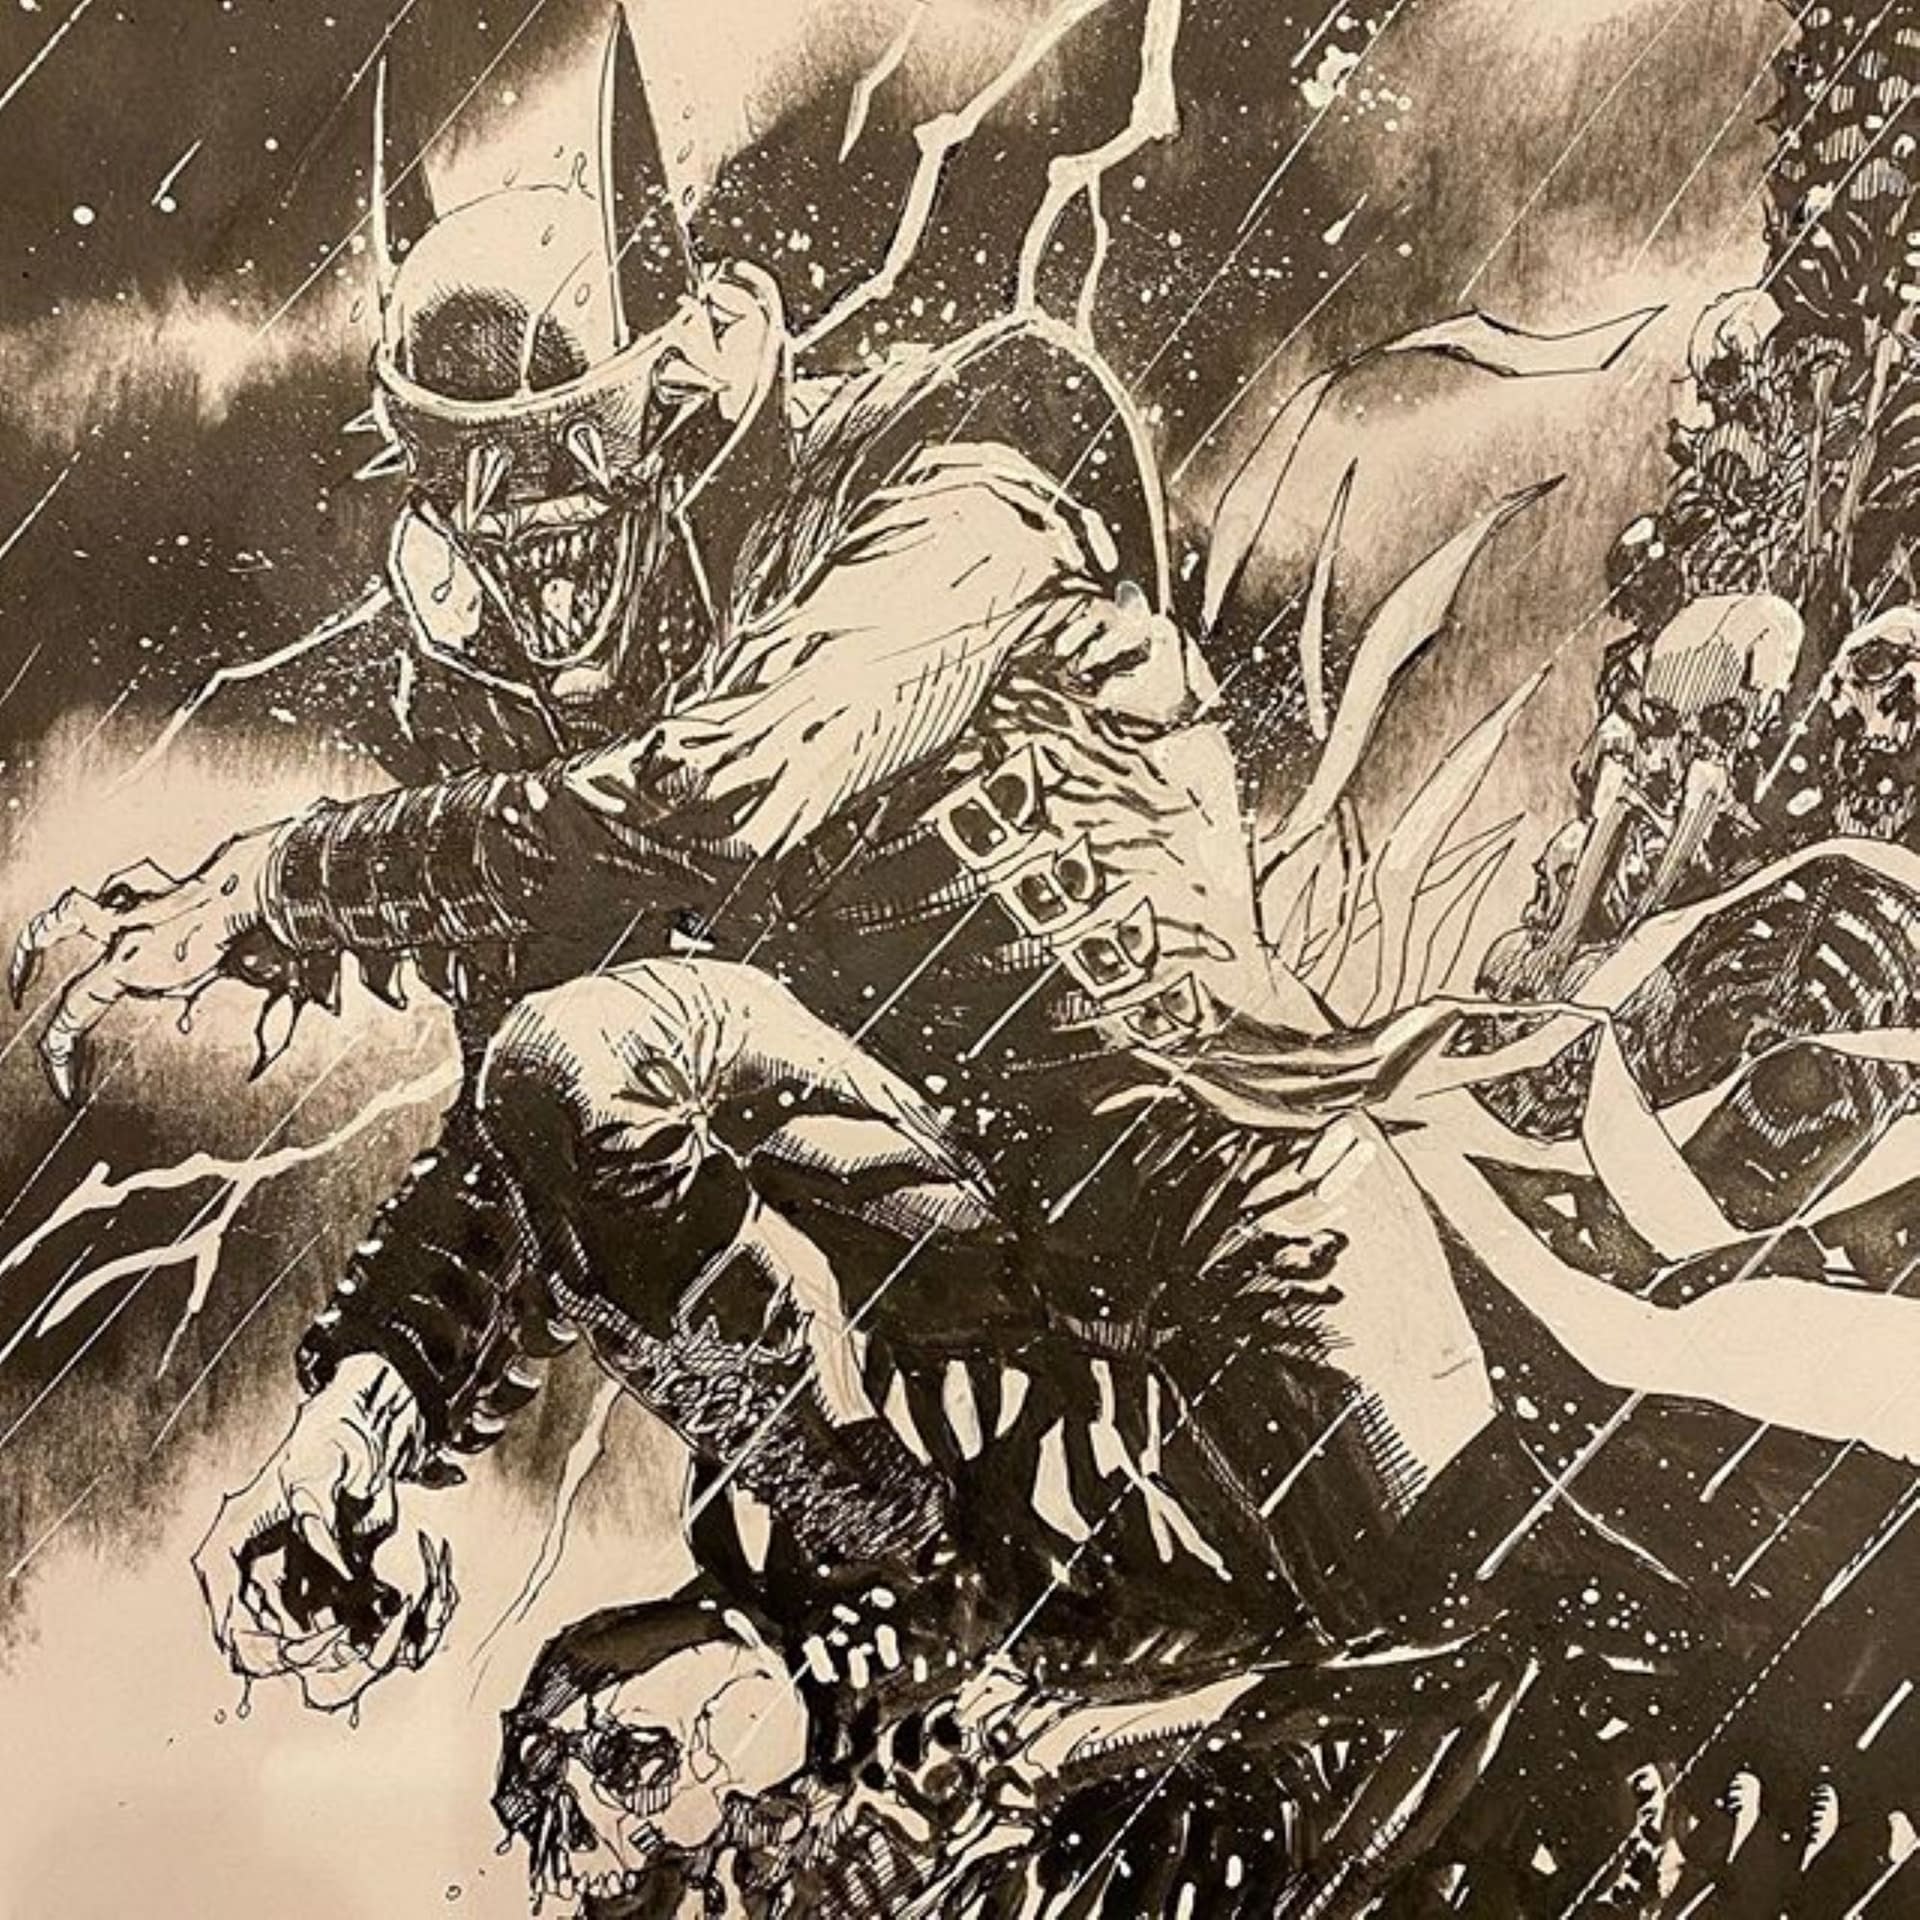 Jim Lee Instagram Art To Be Published to Support Comic Book Stores